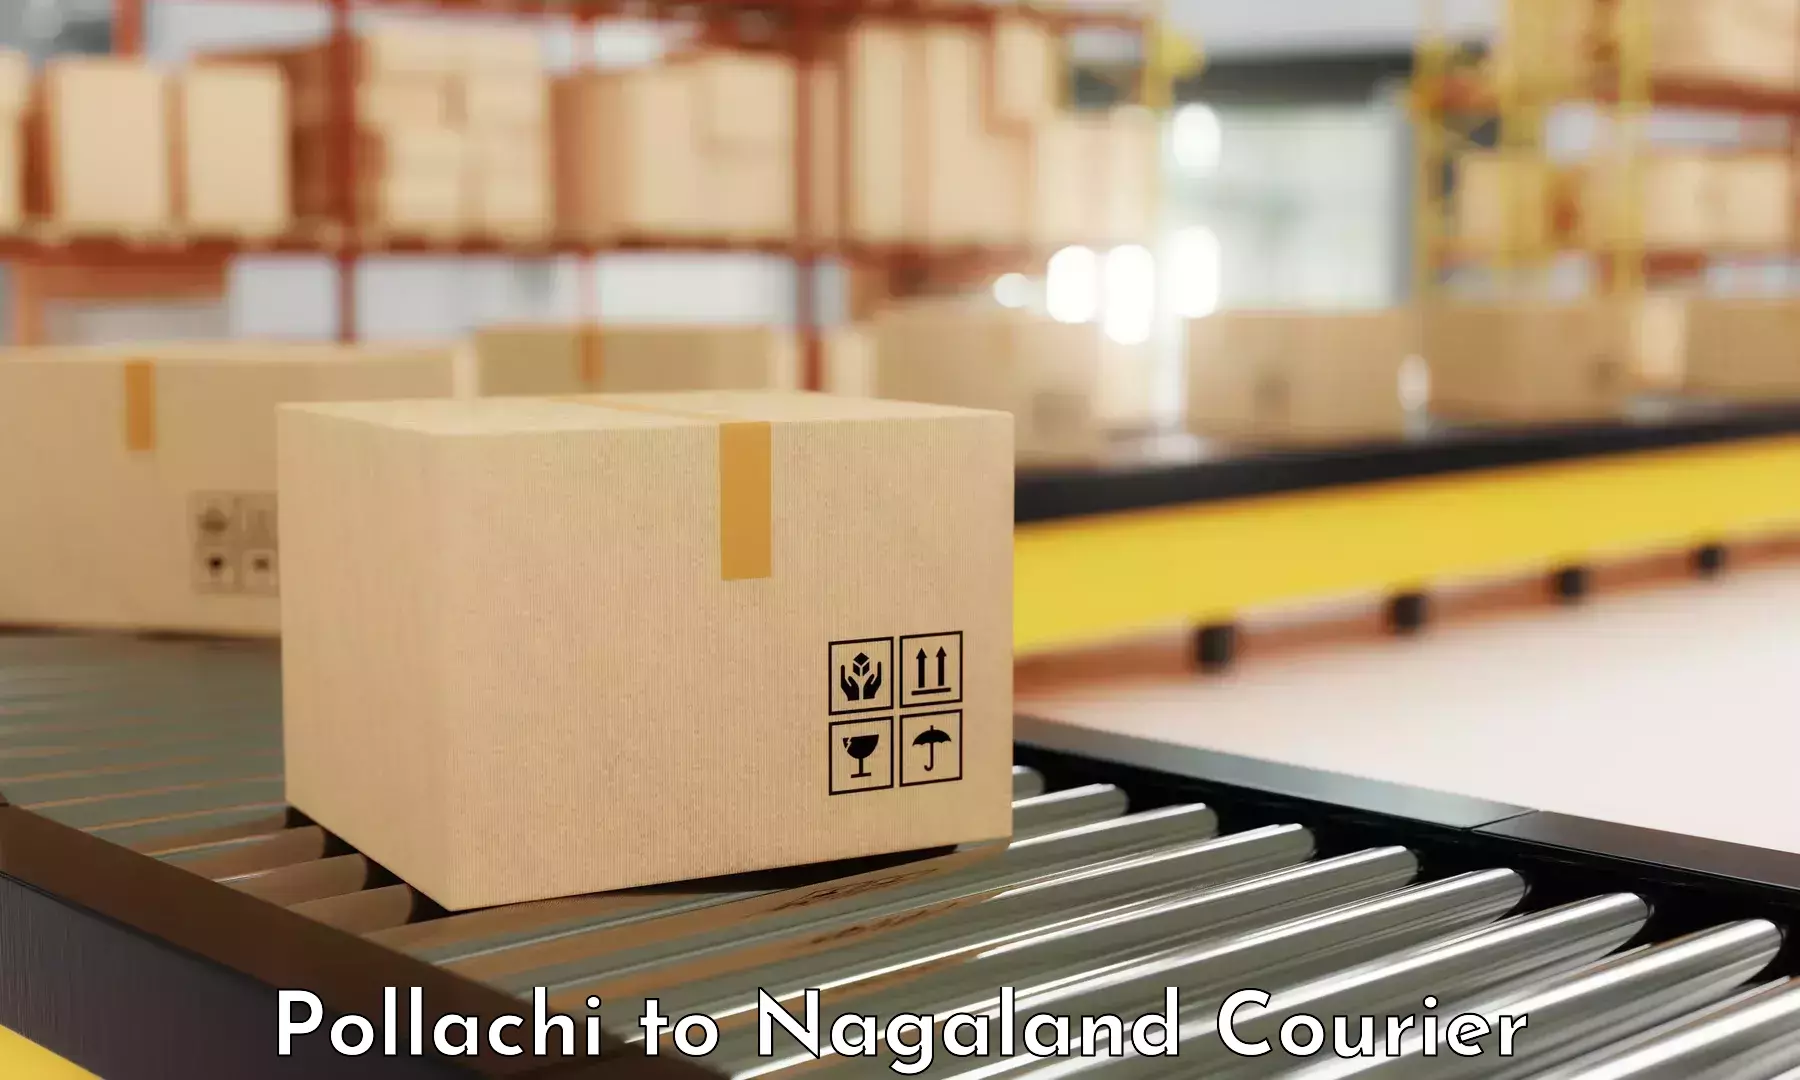 State-of-the-art courier technology Pollachi to Mon